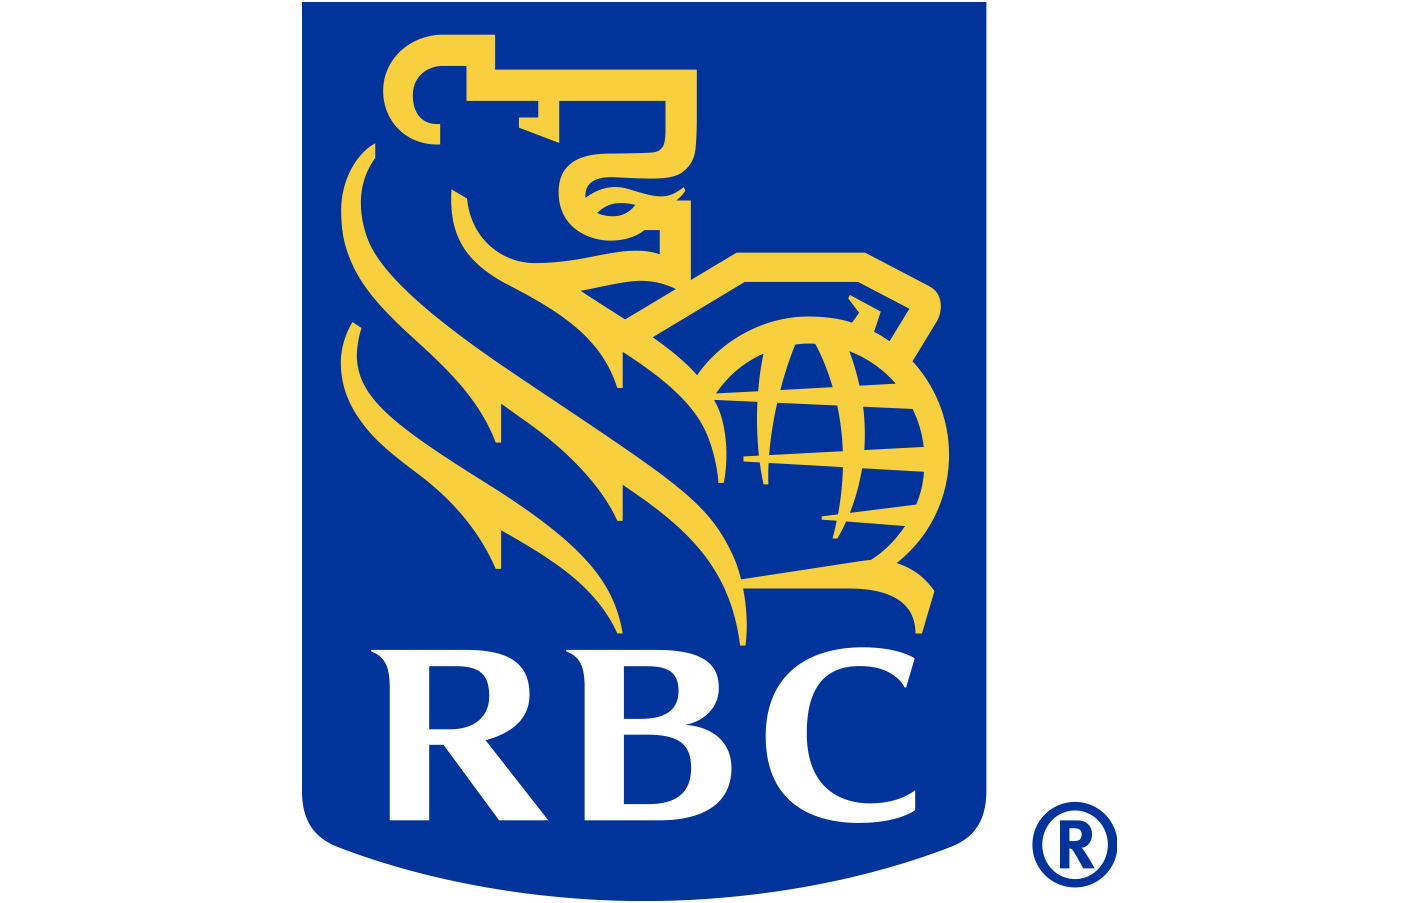 RBC Shield blue and yellow on light background pms v5